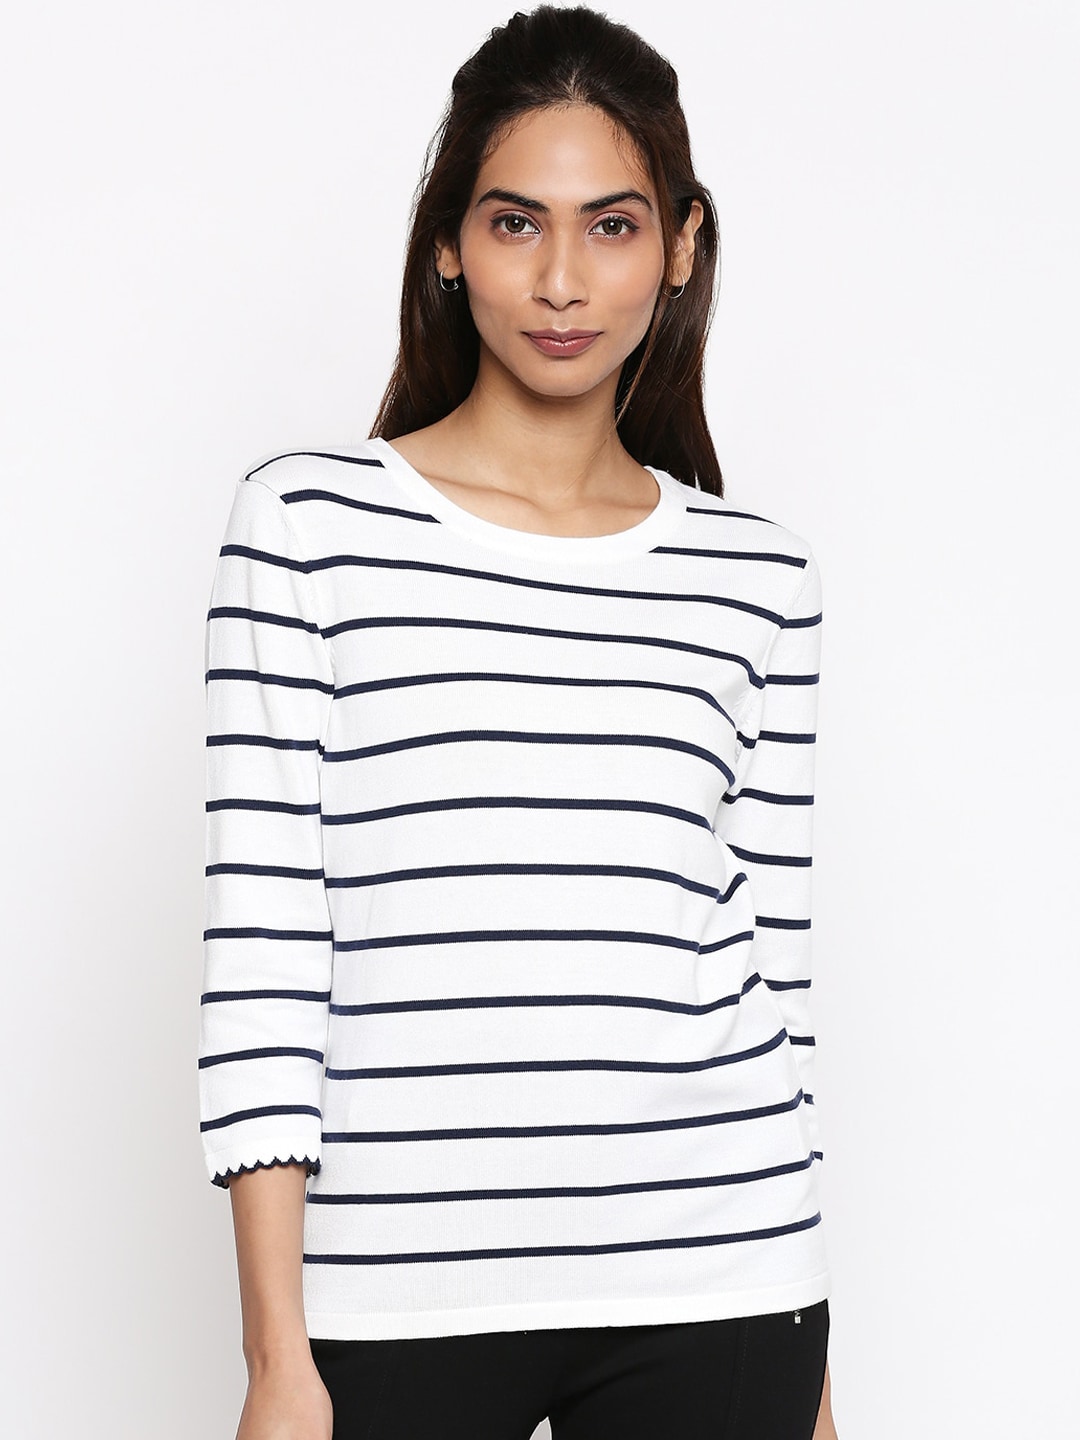 Annabelle by Pantaloons Women White & Black Striped Pullover Sweater Price in India